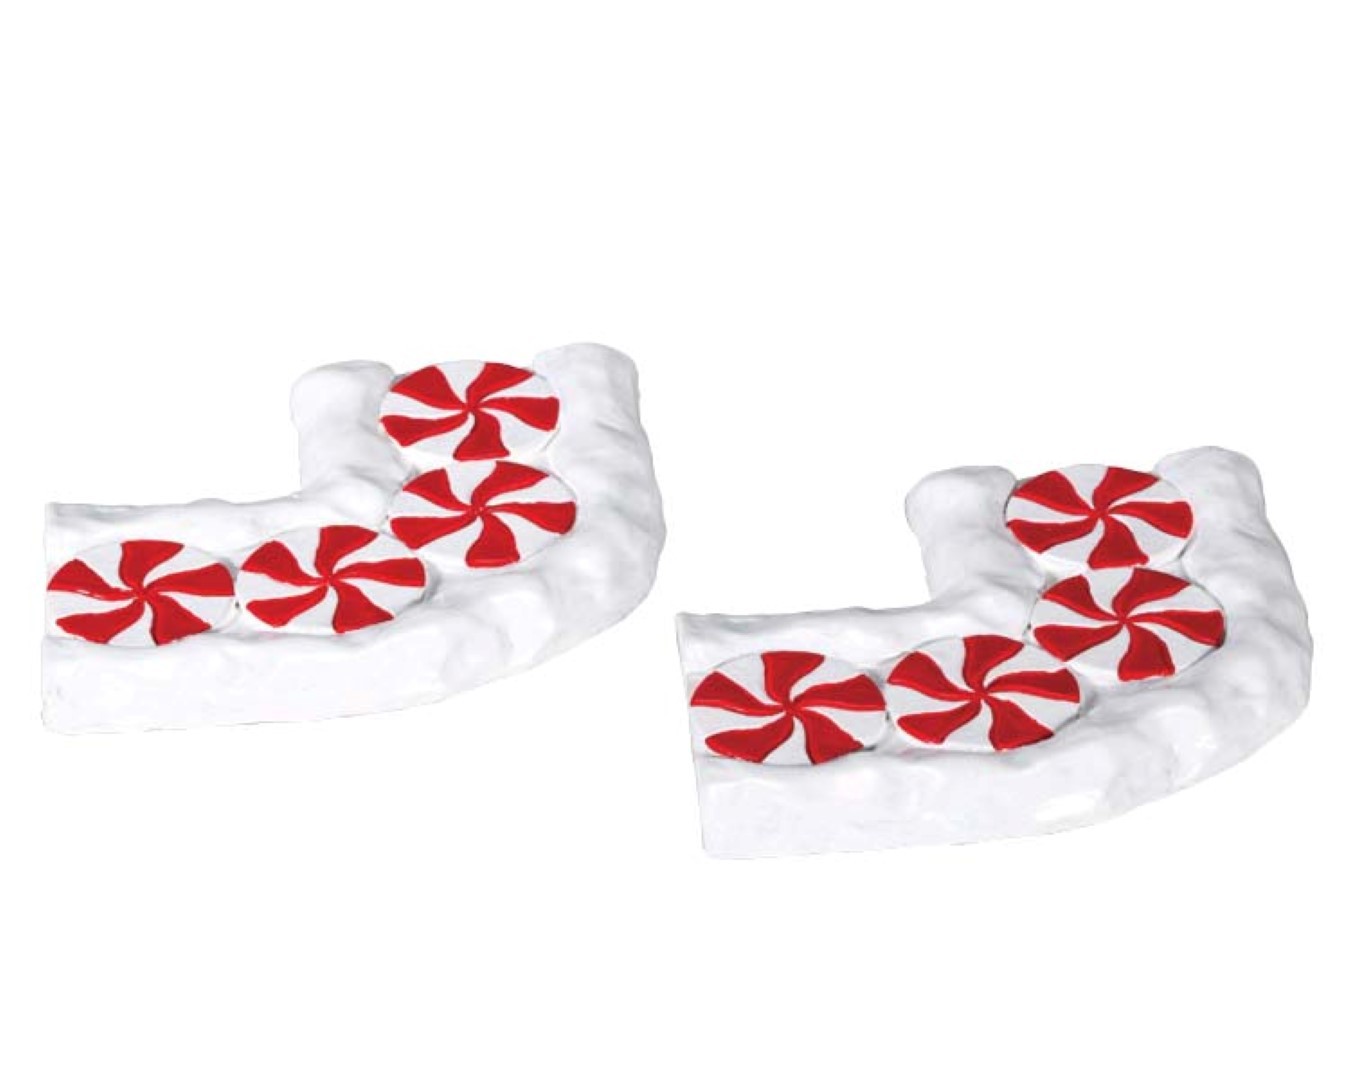 LEMAX Candy cane lane curved set of 2 - 